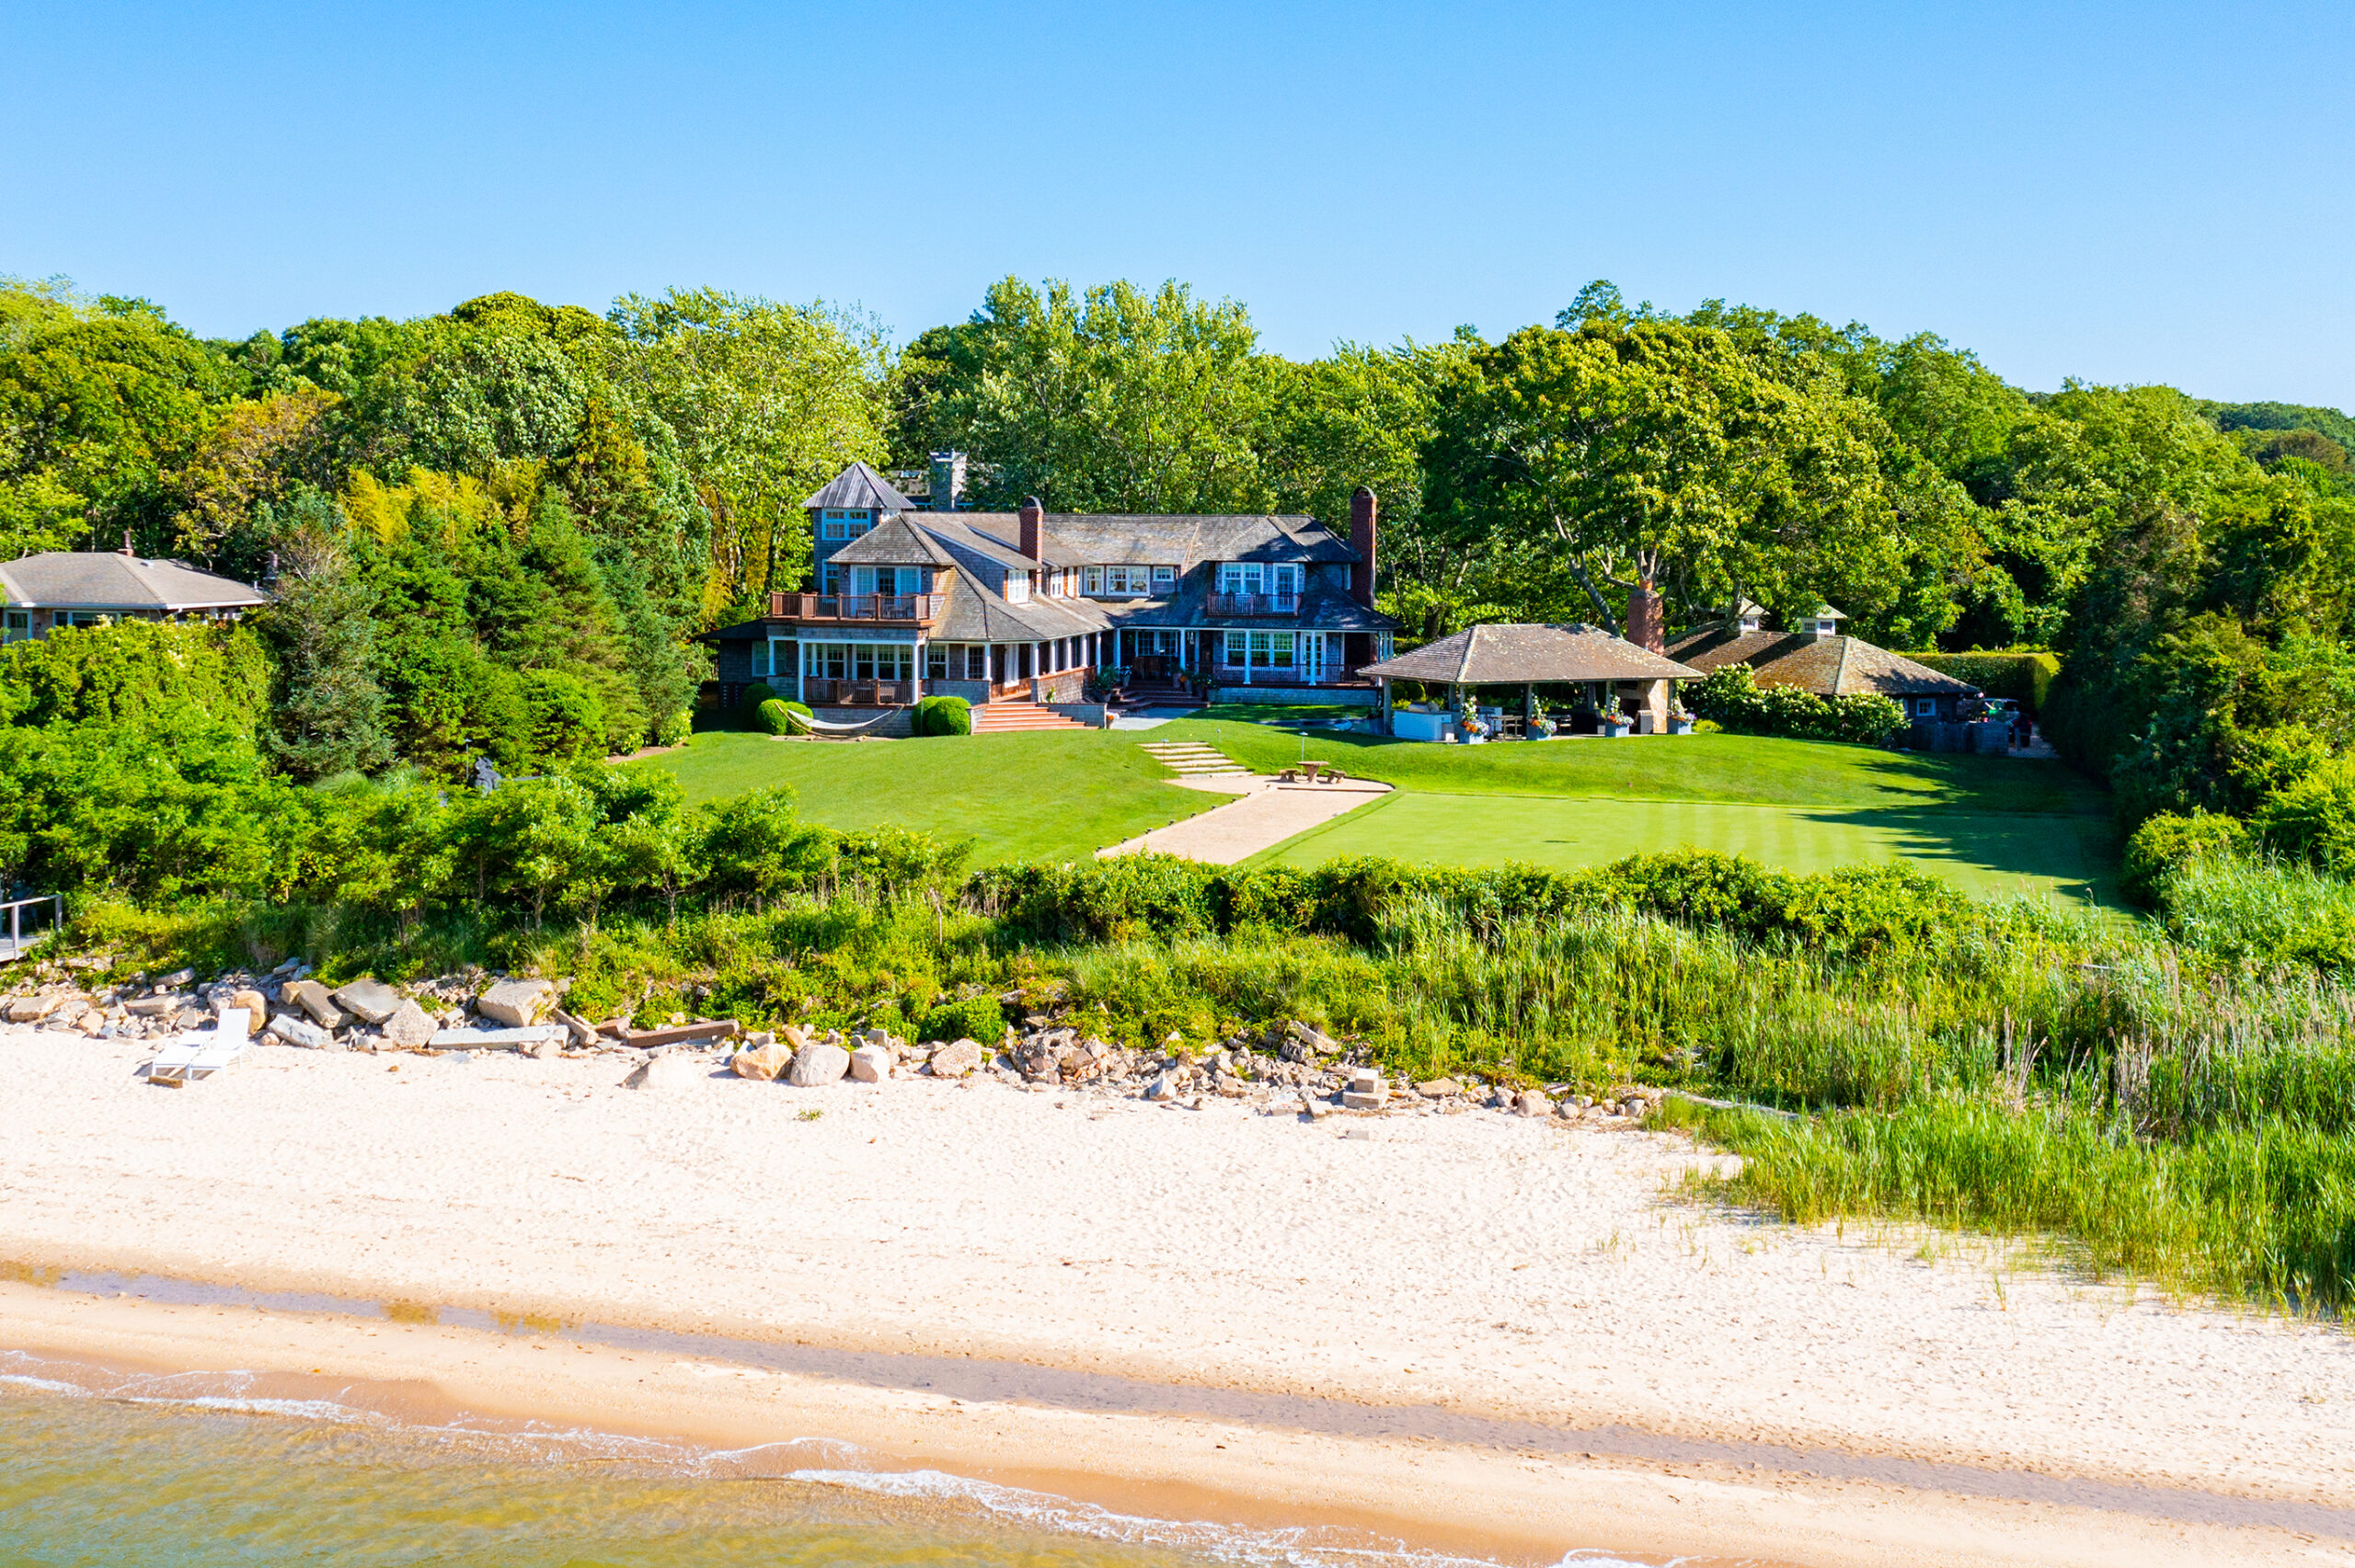 Recently sold at 25 Shaw Road in Sag Harbor.  COURTESY THE CORCORAN GROUP